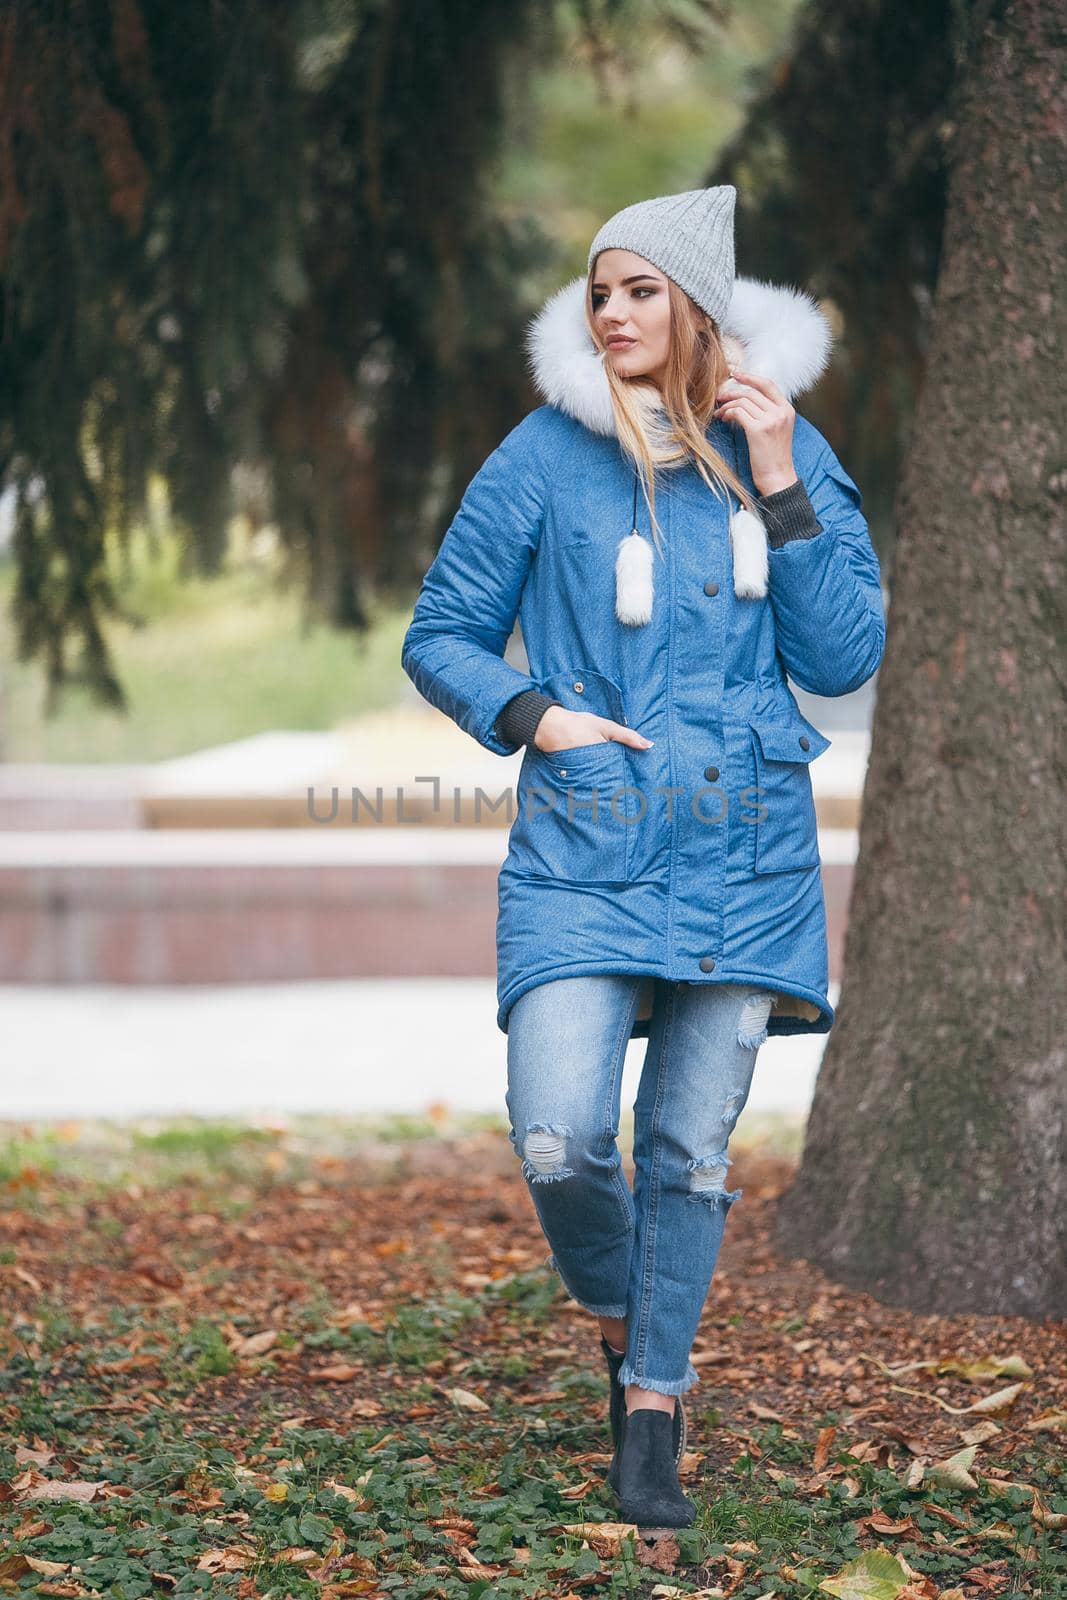 In love with nature, a girl in a jacket walks through the autumn park. warm clothes for the autumn season by UcheaD